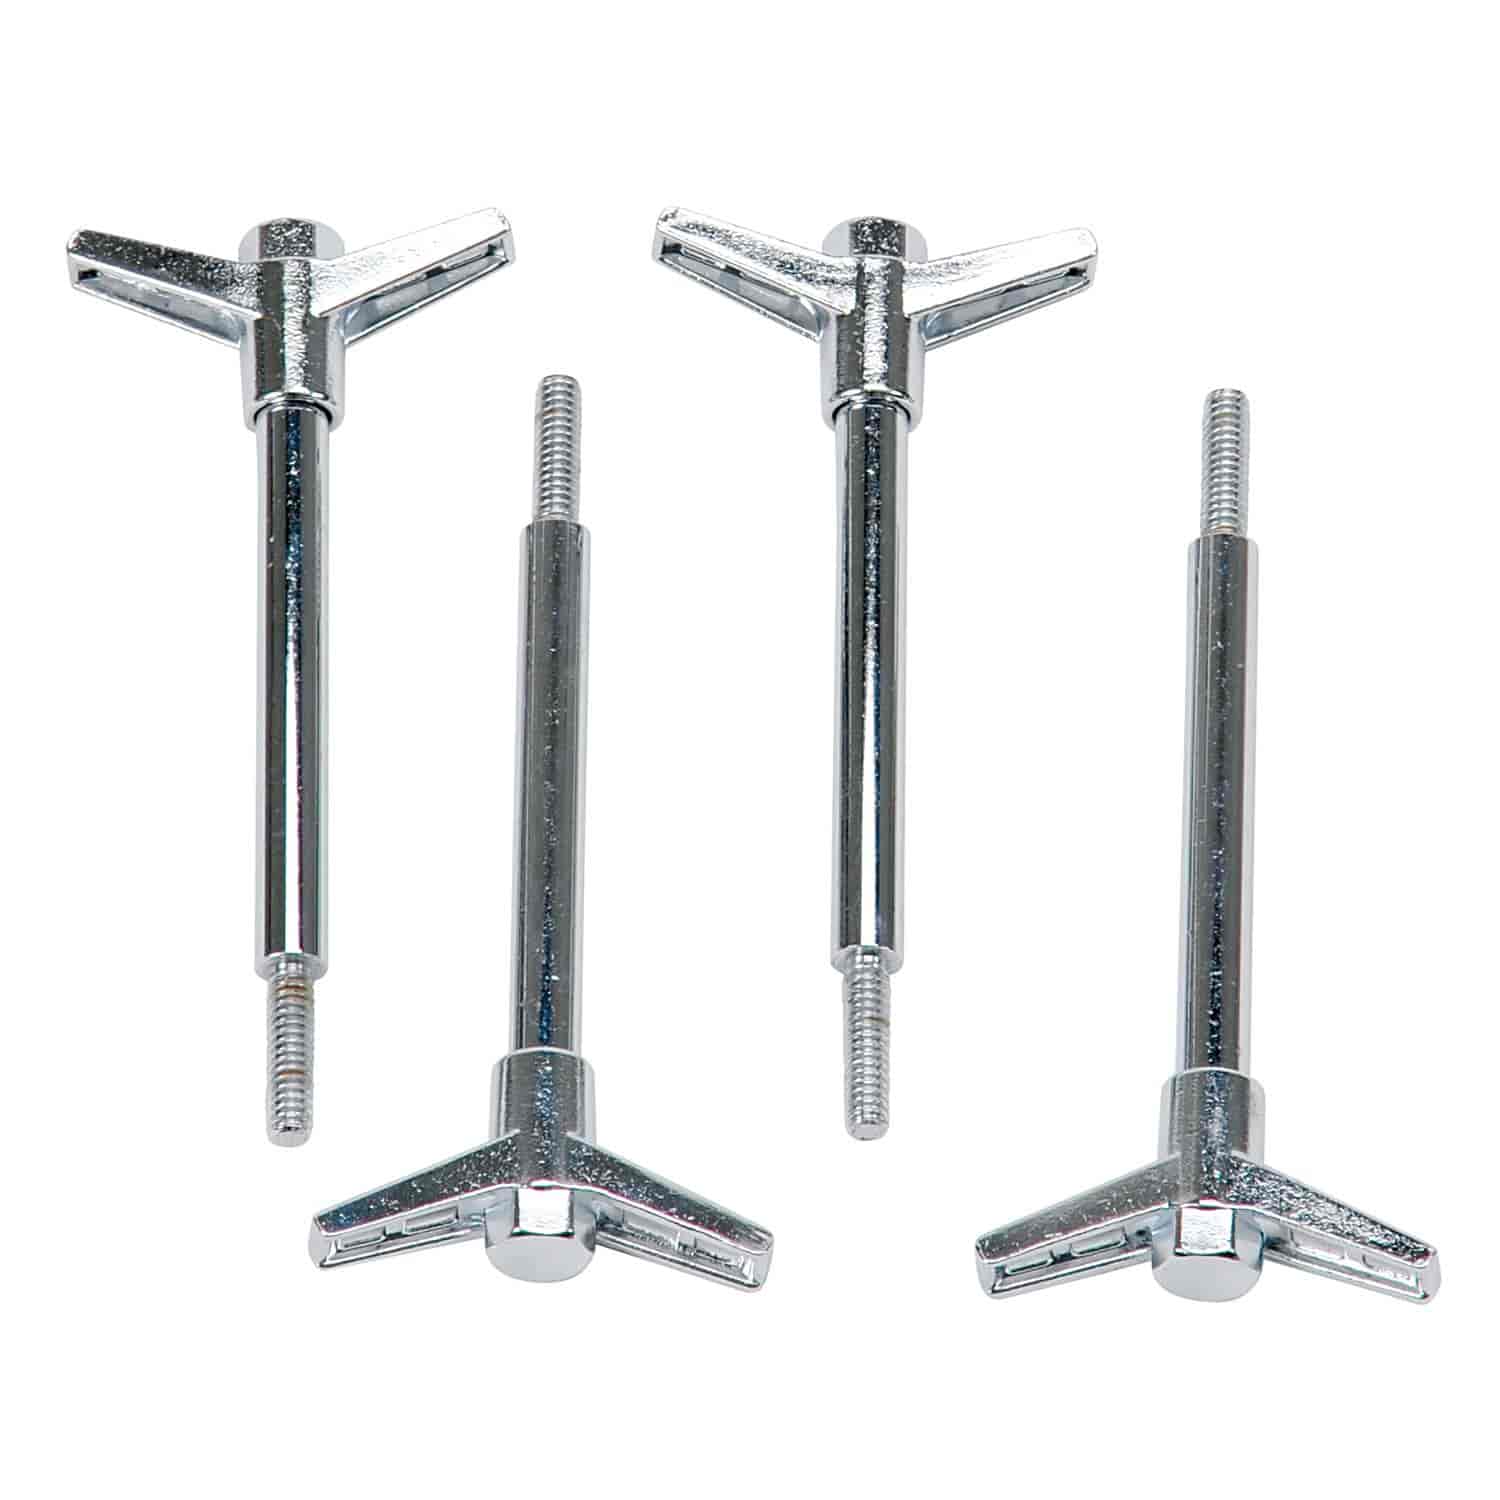 2-Piece Wing Bolts with T-Top, Length of  4-1/4"